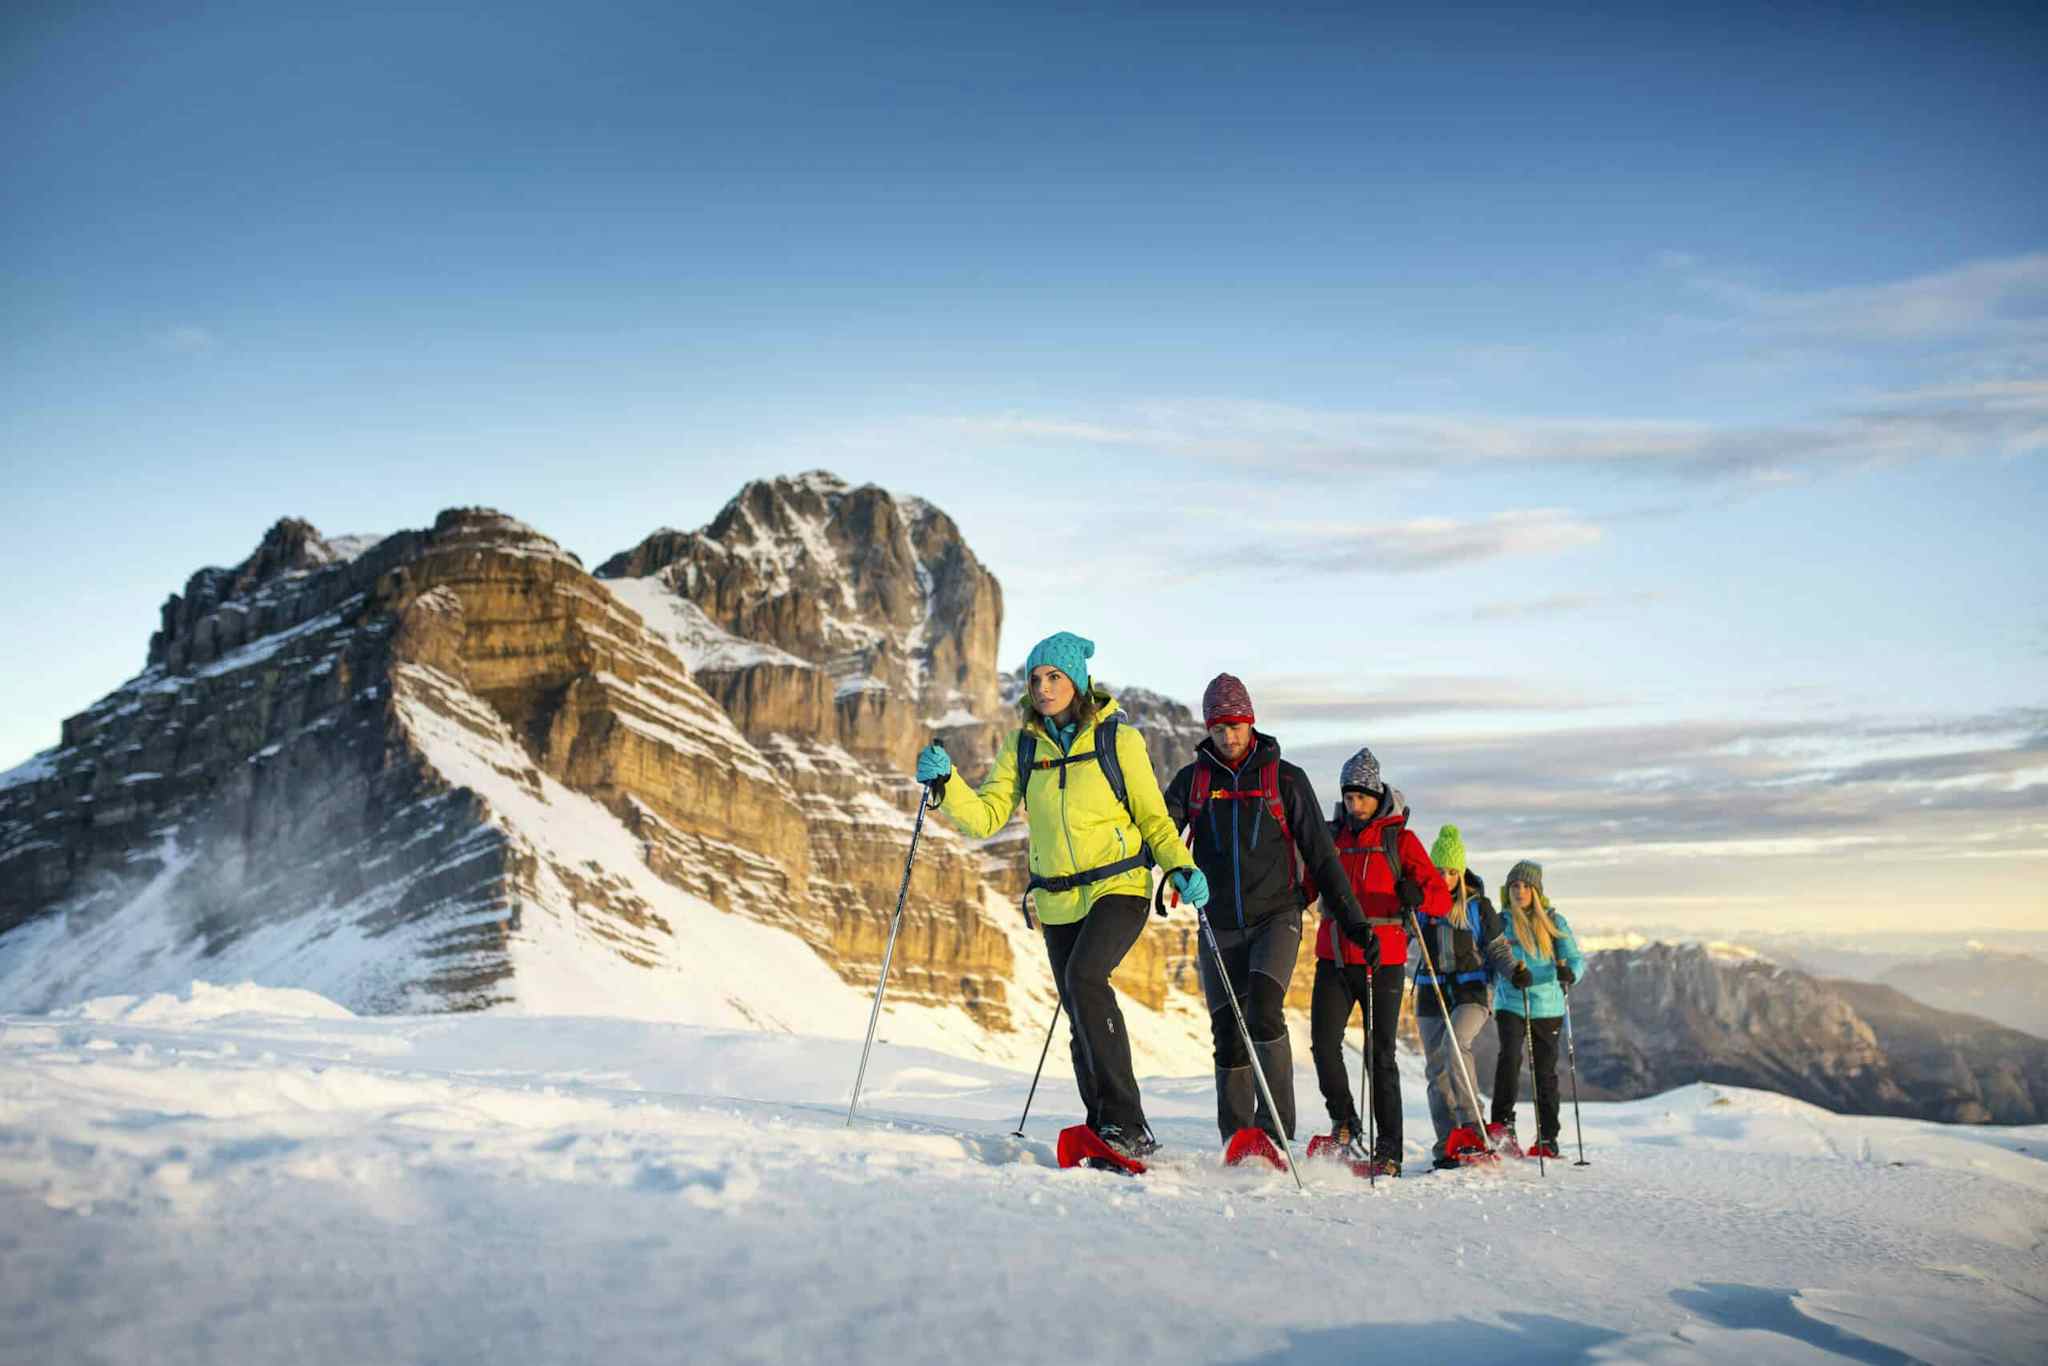 A group of hikers snowshoeing in front of the peaks of the Dolomites, Italy.